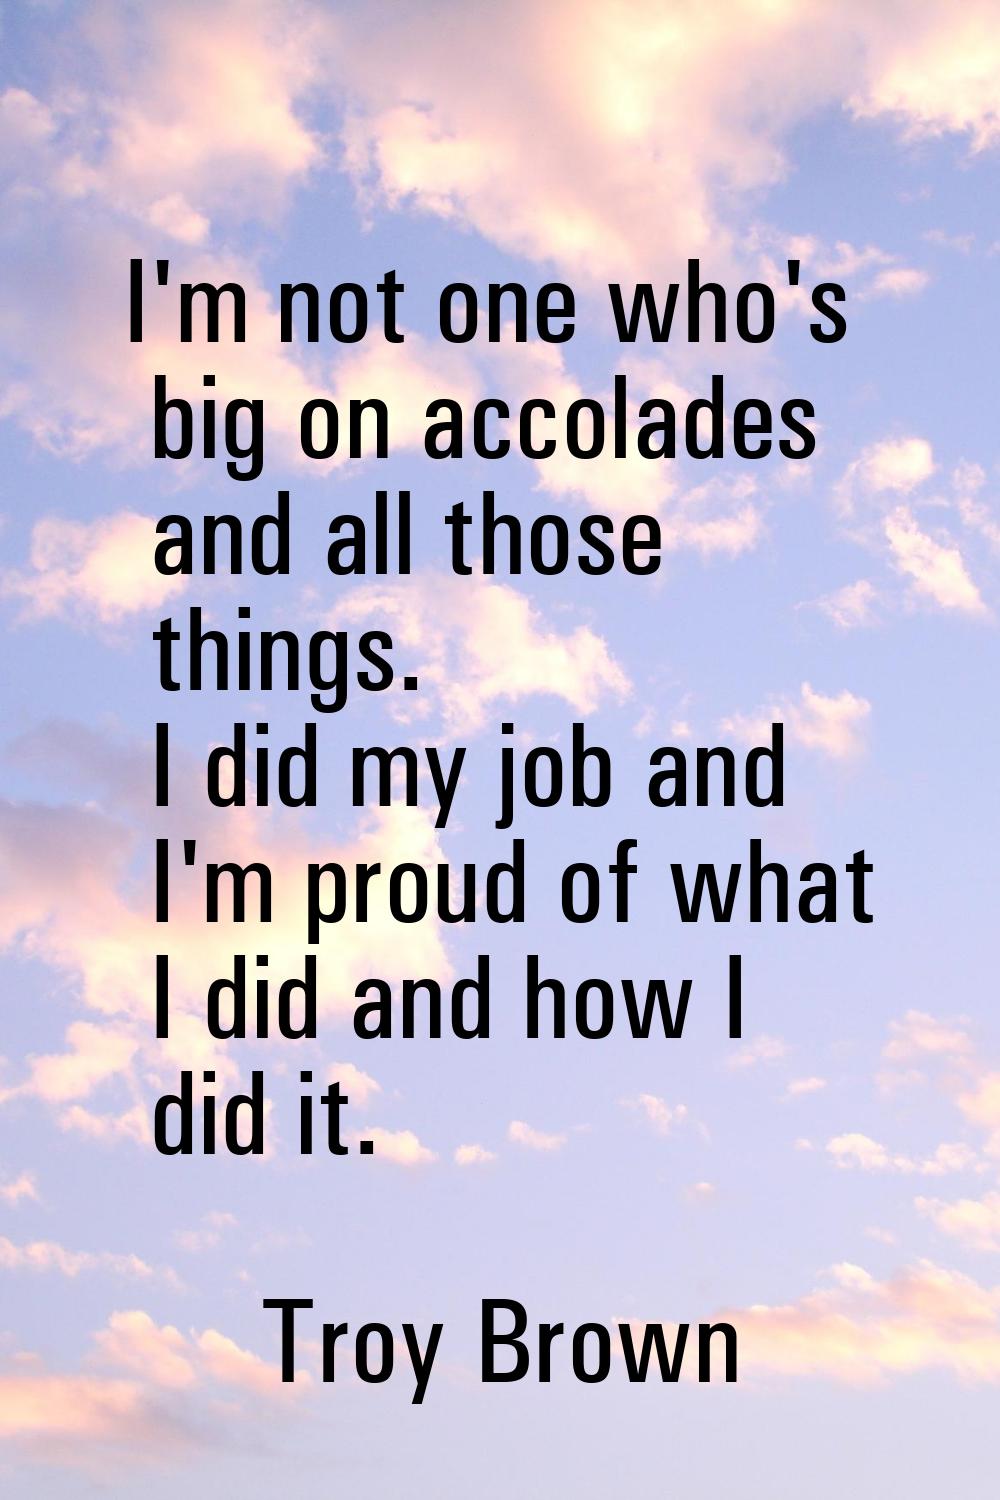 I'm not one who's big on accolades and all those things. I did my job and I'm proud of what I did a